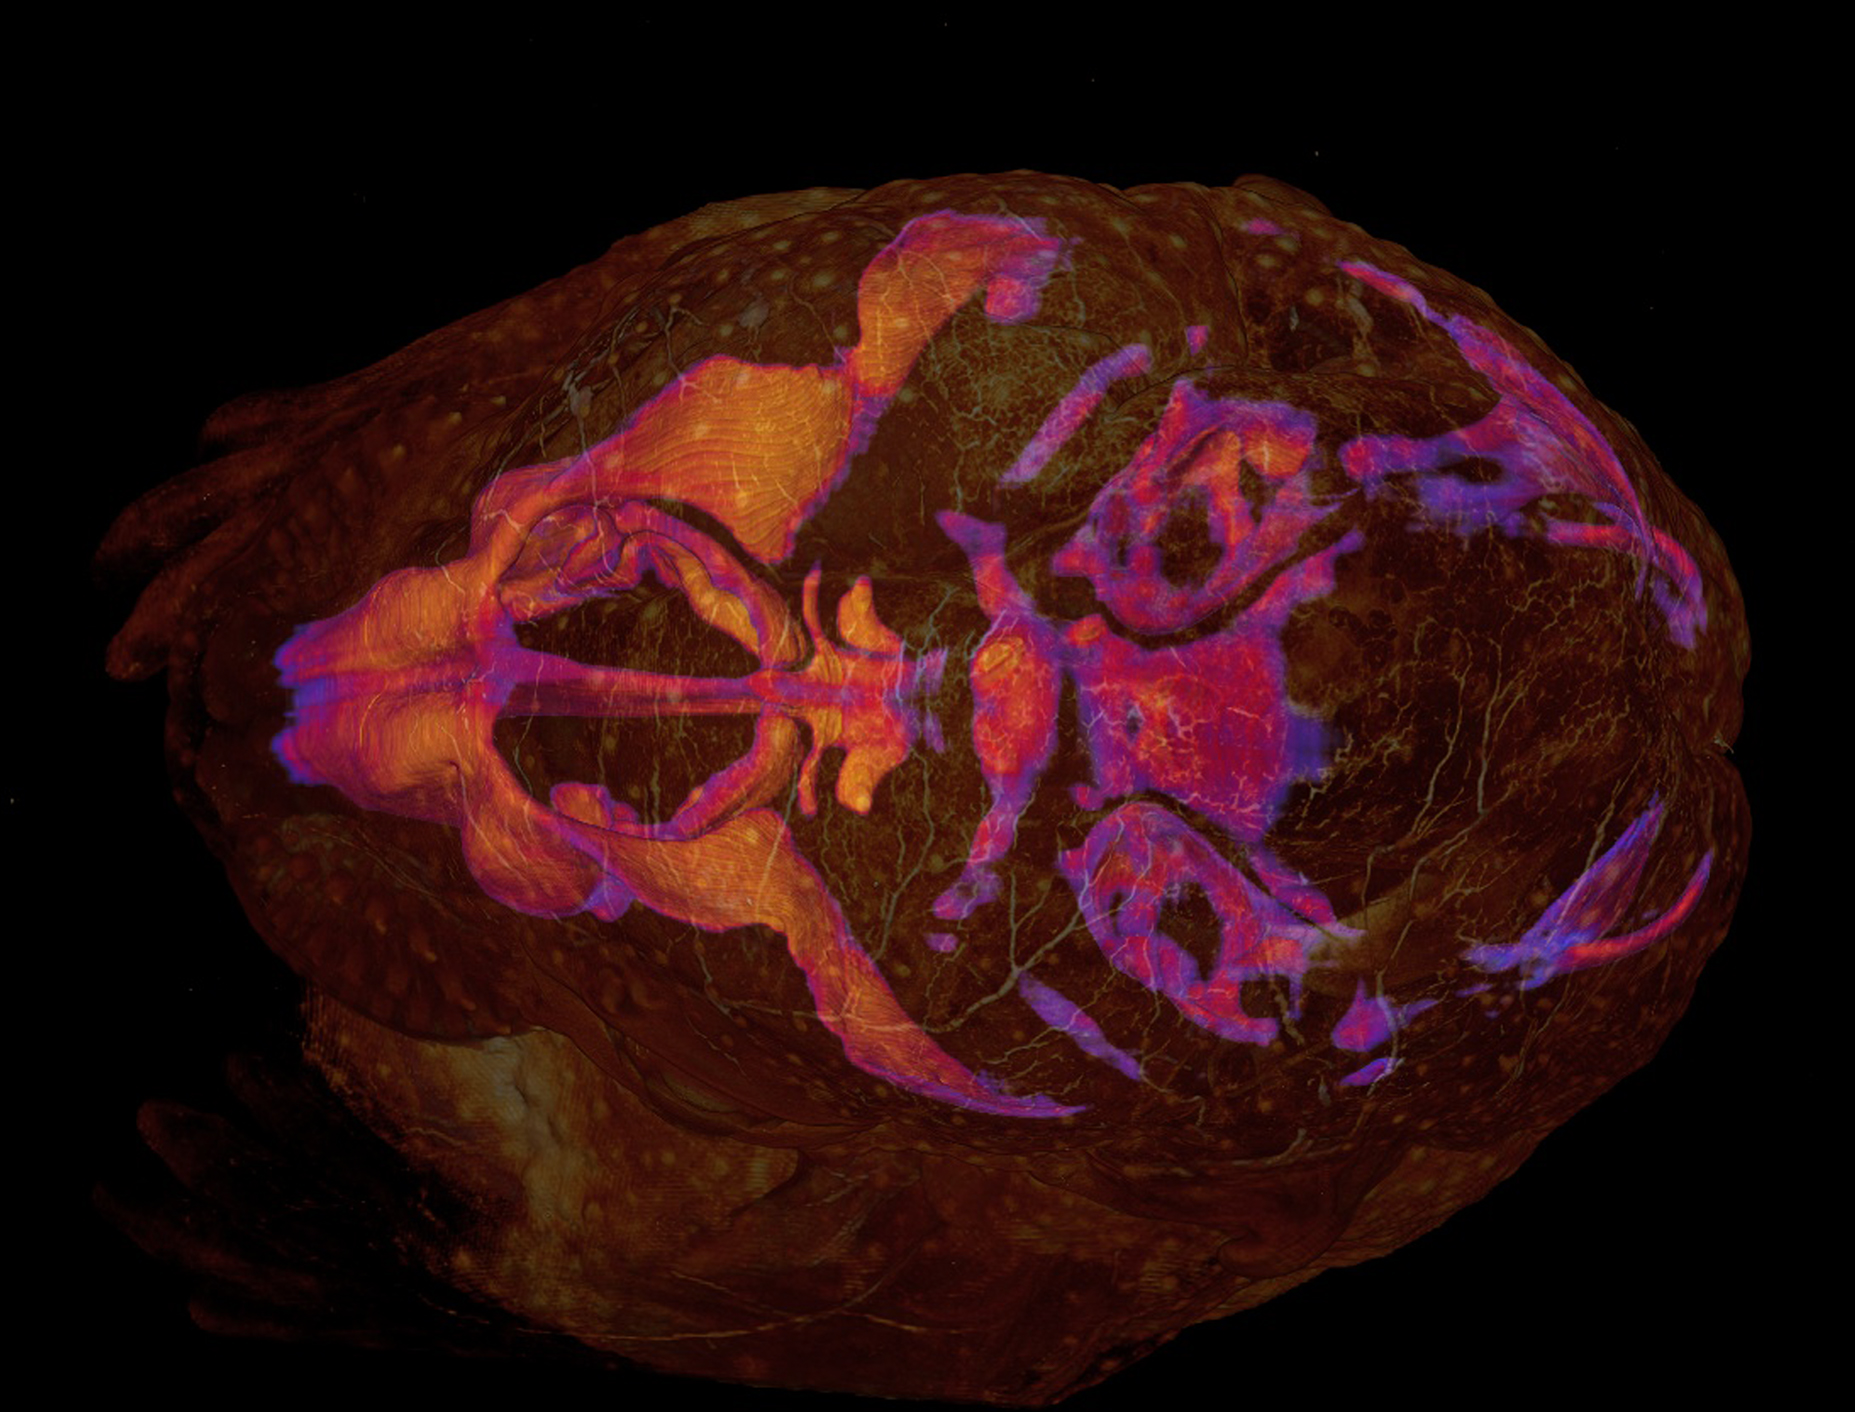 AAA BioArt Competition awards Richtsmeier Lab members for stunning visualization of the mouse chondrocranium